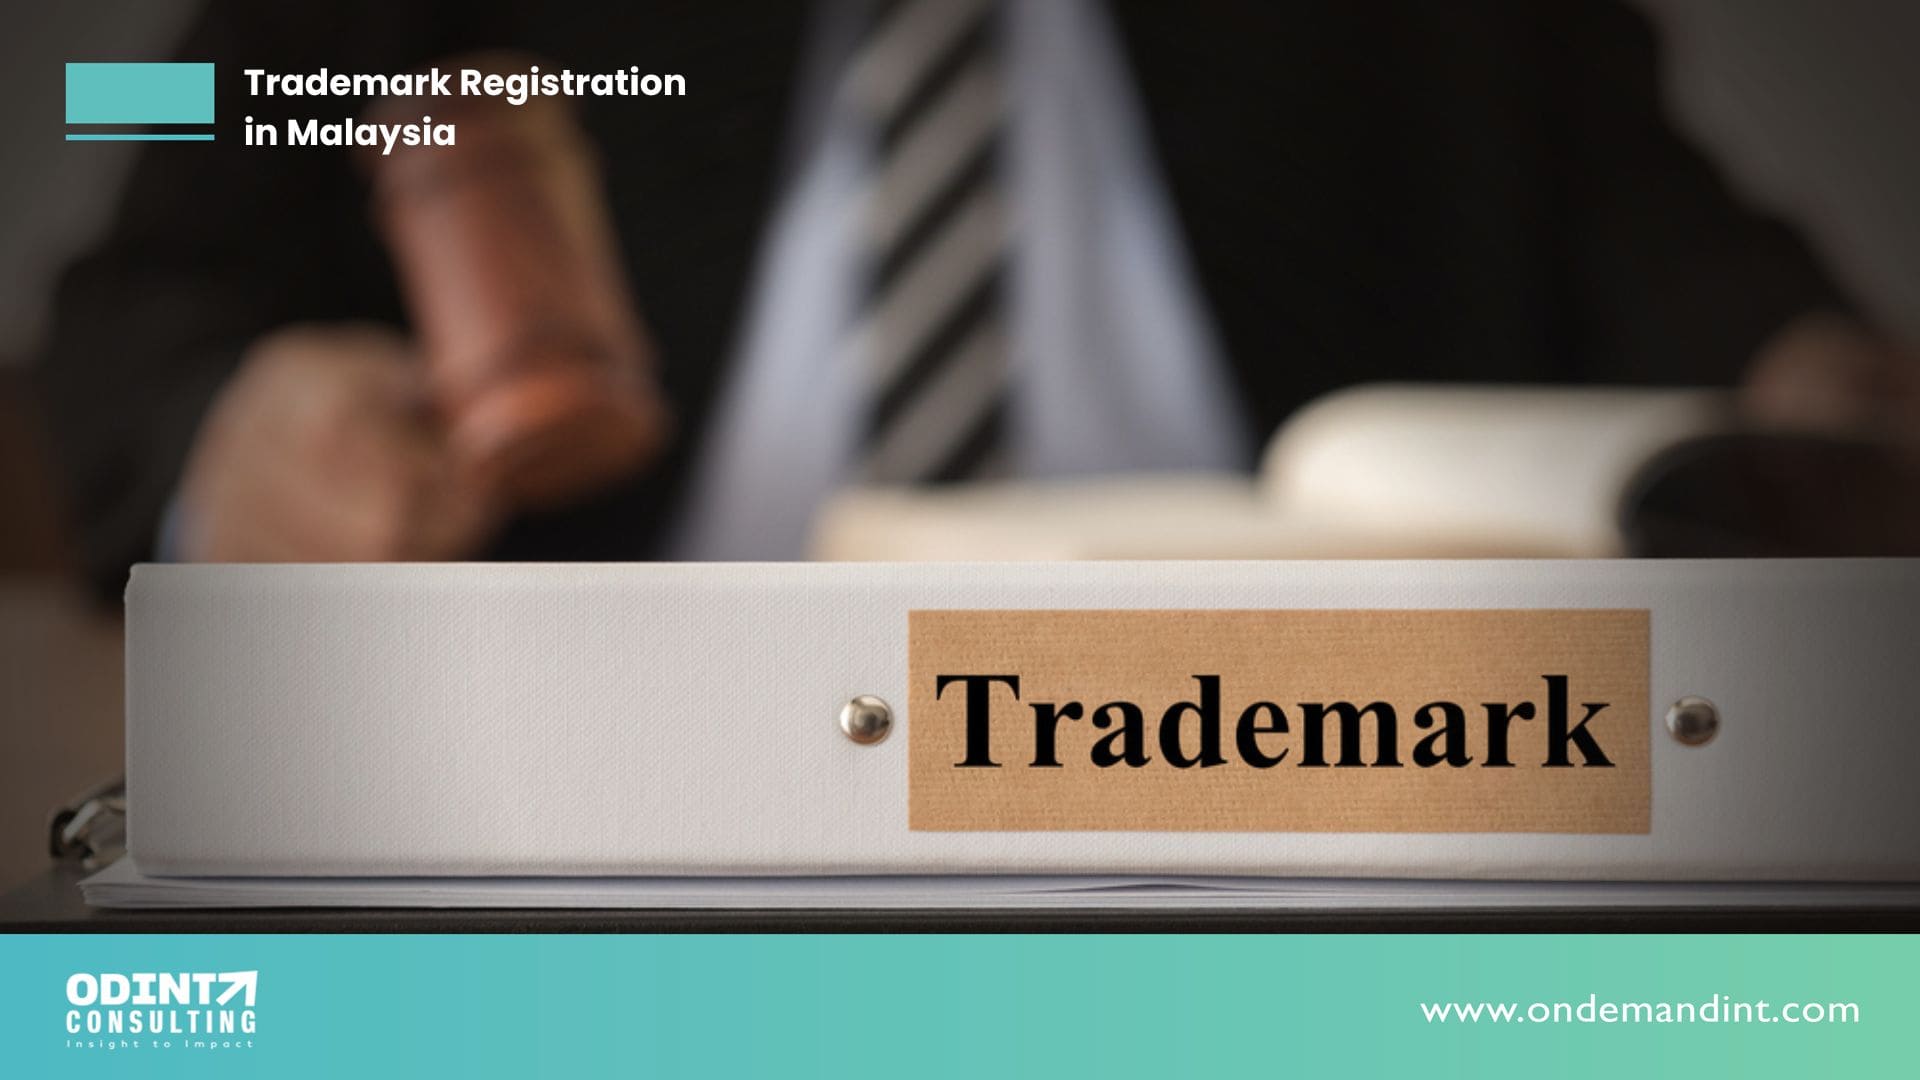 Trademark Registration in Malaysia: Process, Benefits & Needs